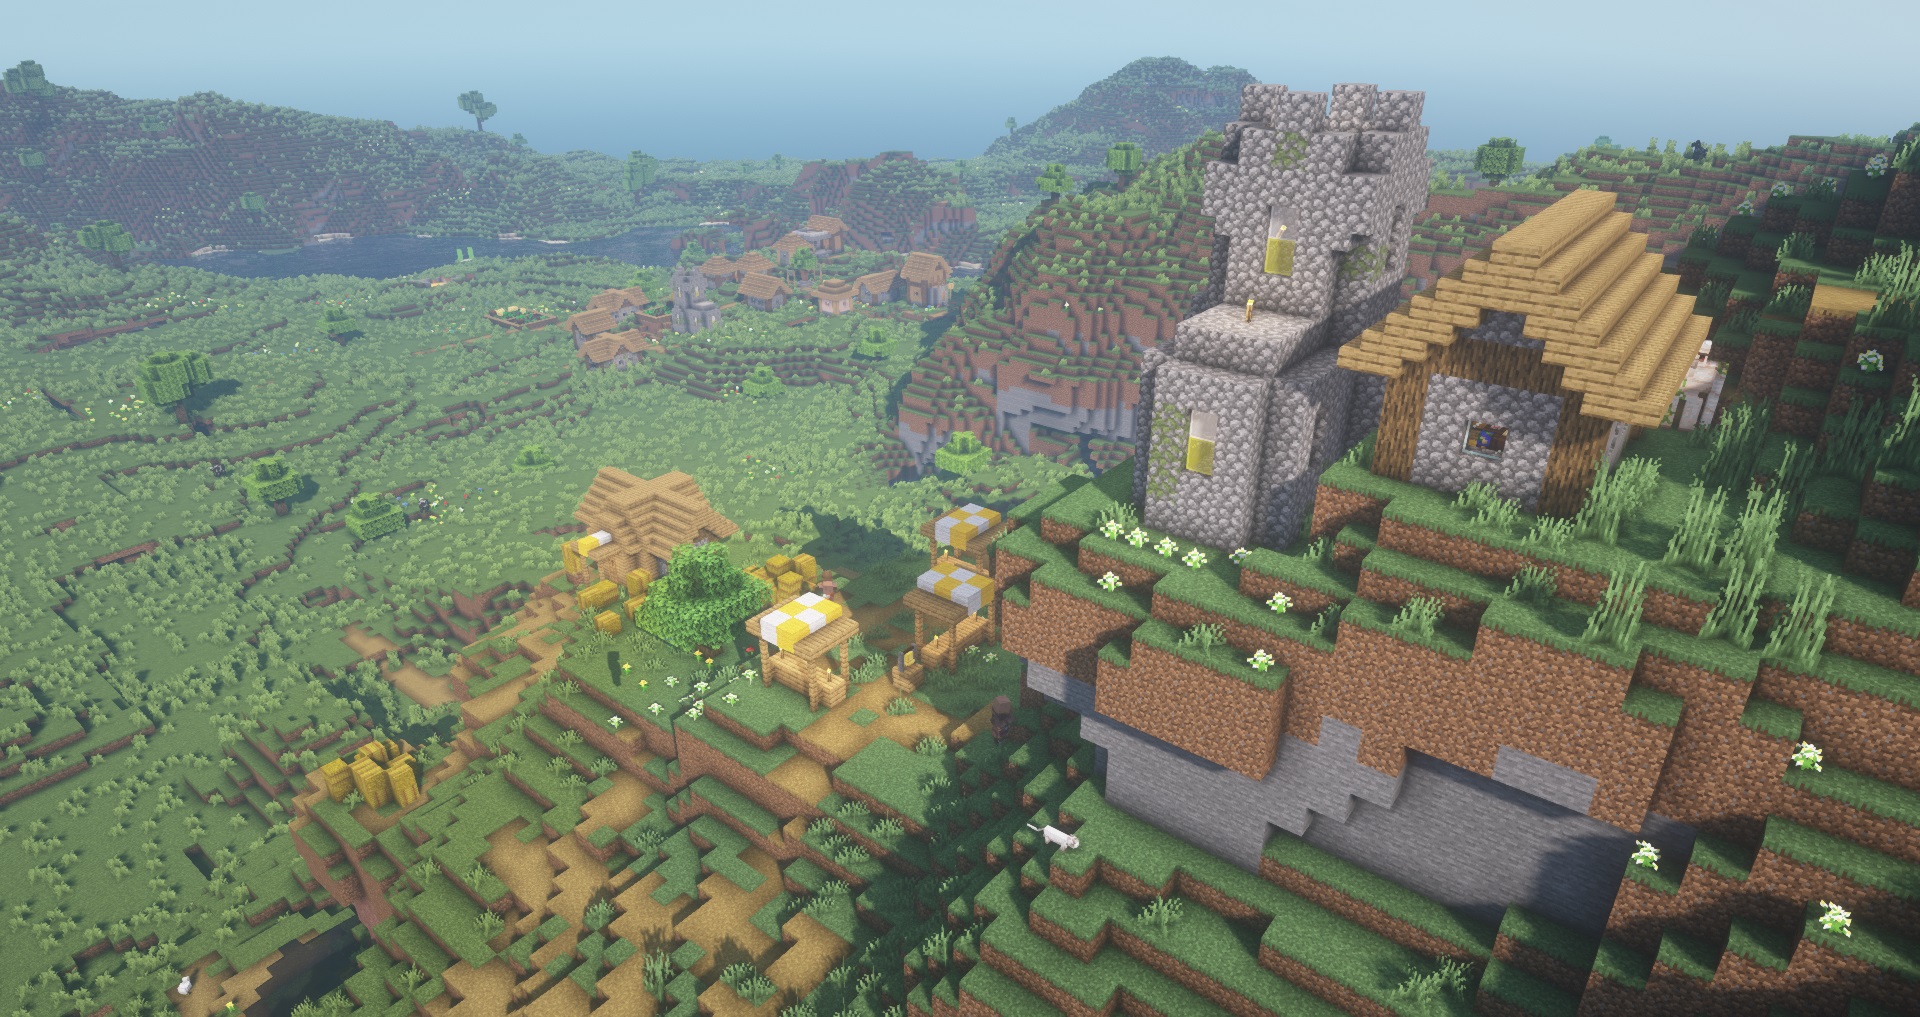 Minecraft - Two plains village spawned near one another